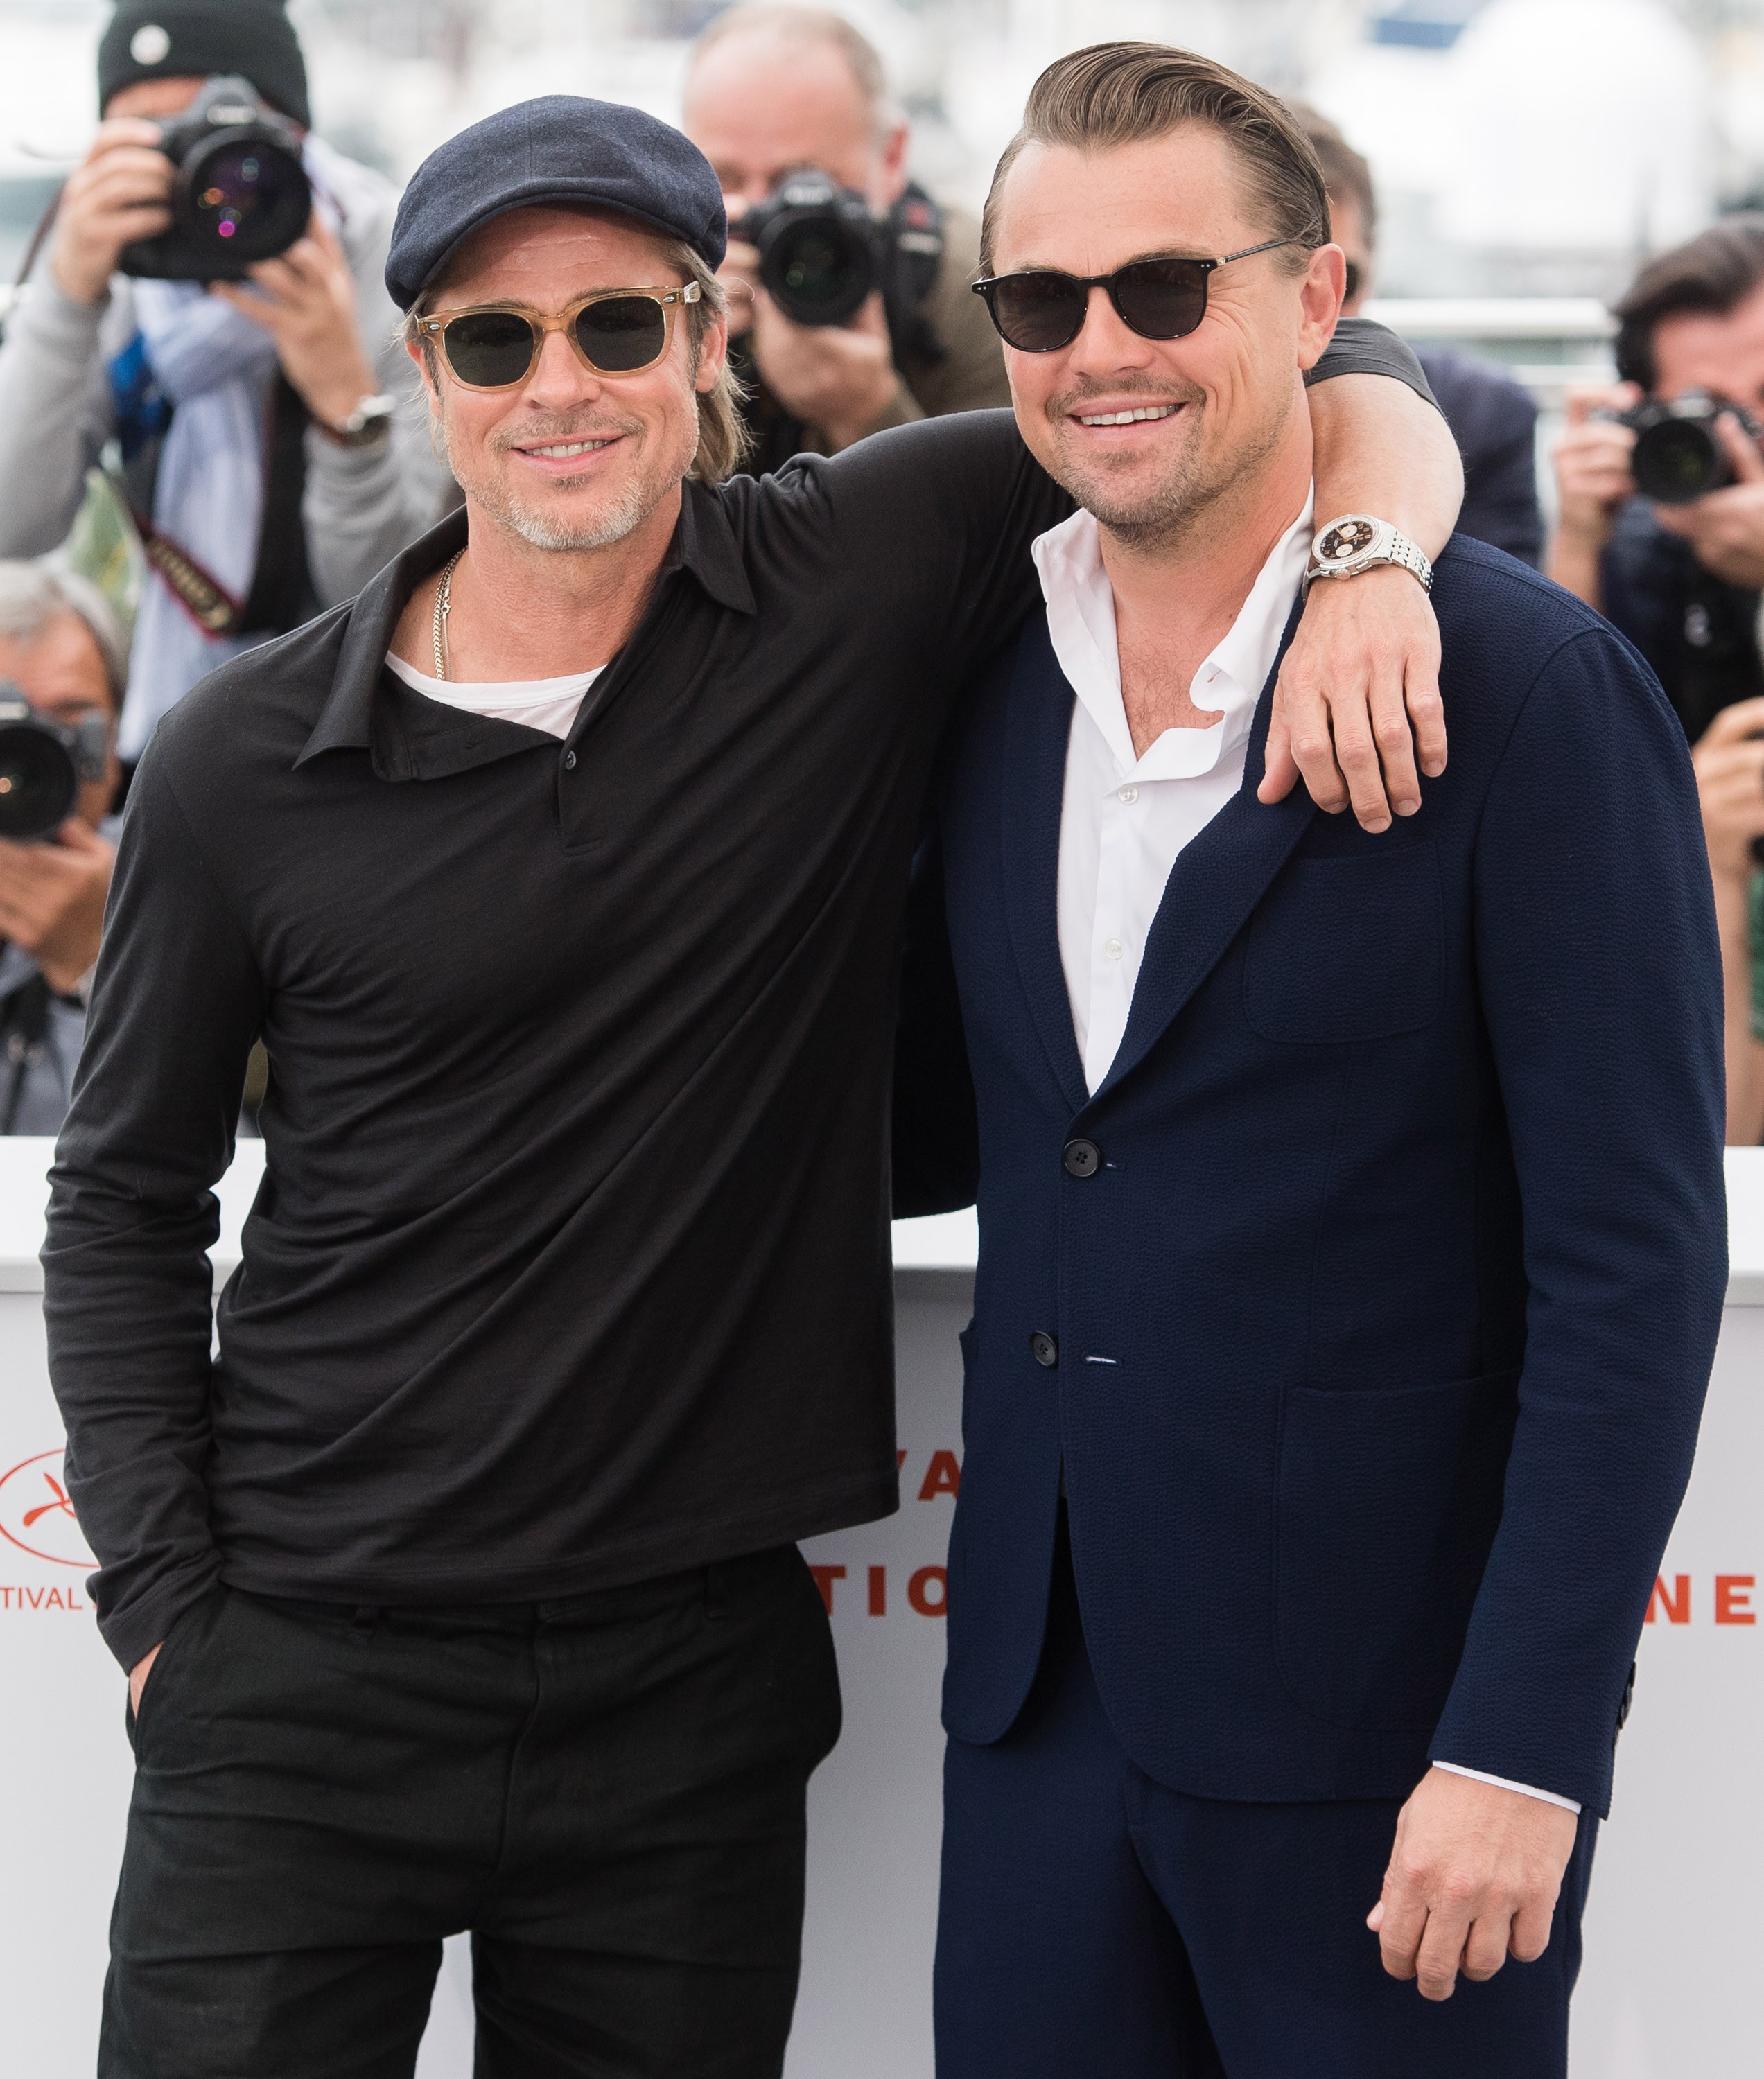 Brad Pitt and Leonardo DiCaprio attend a photocall for Once Upon A Time In Hollywood with Pitt wearing a Breitling watch.